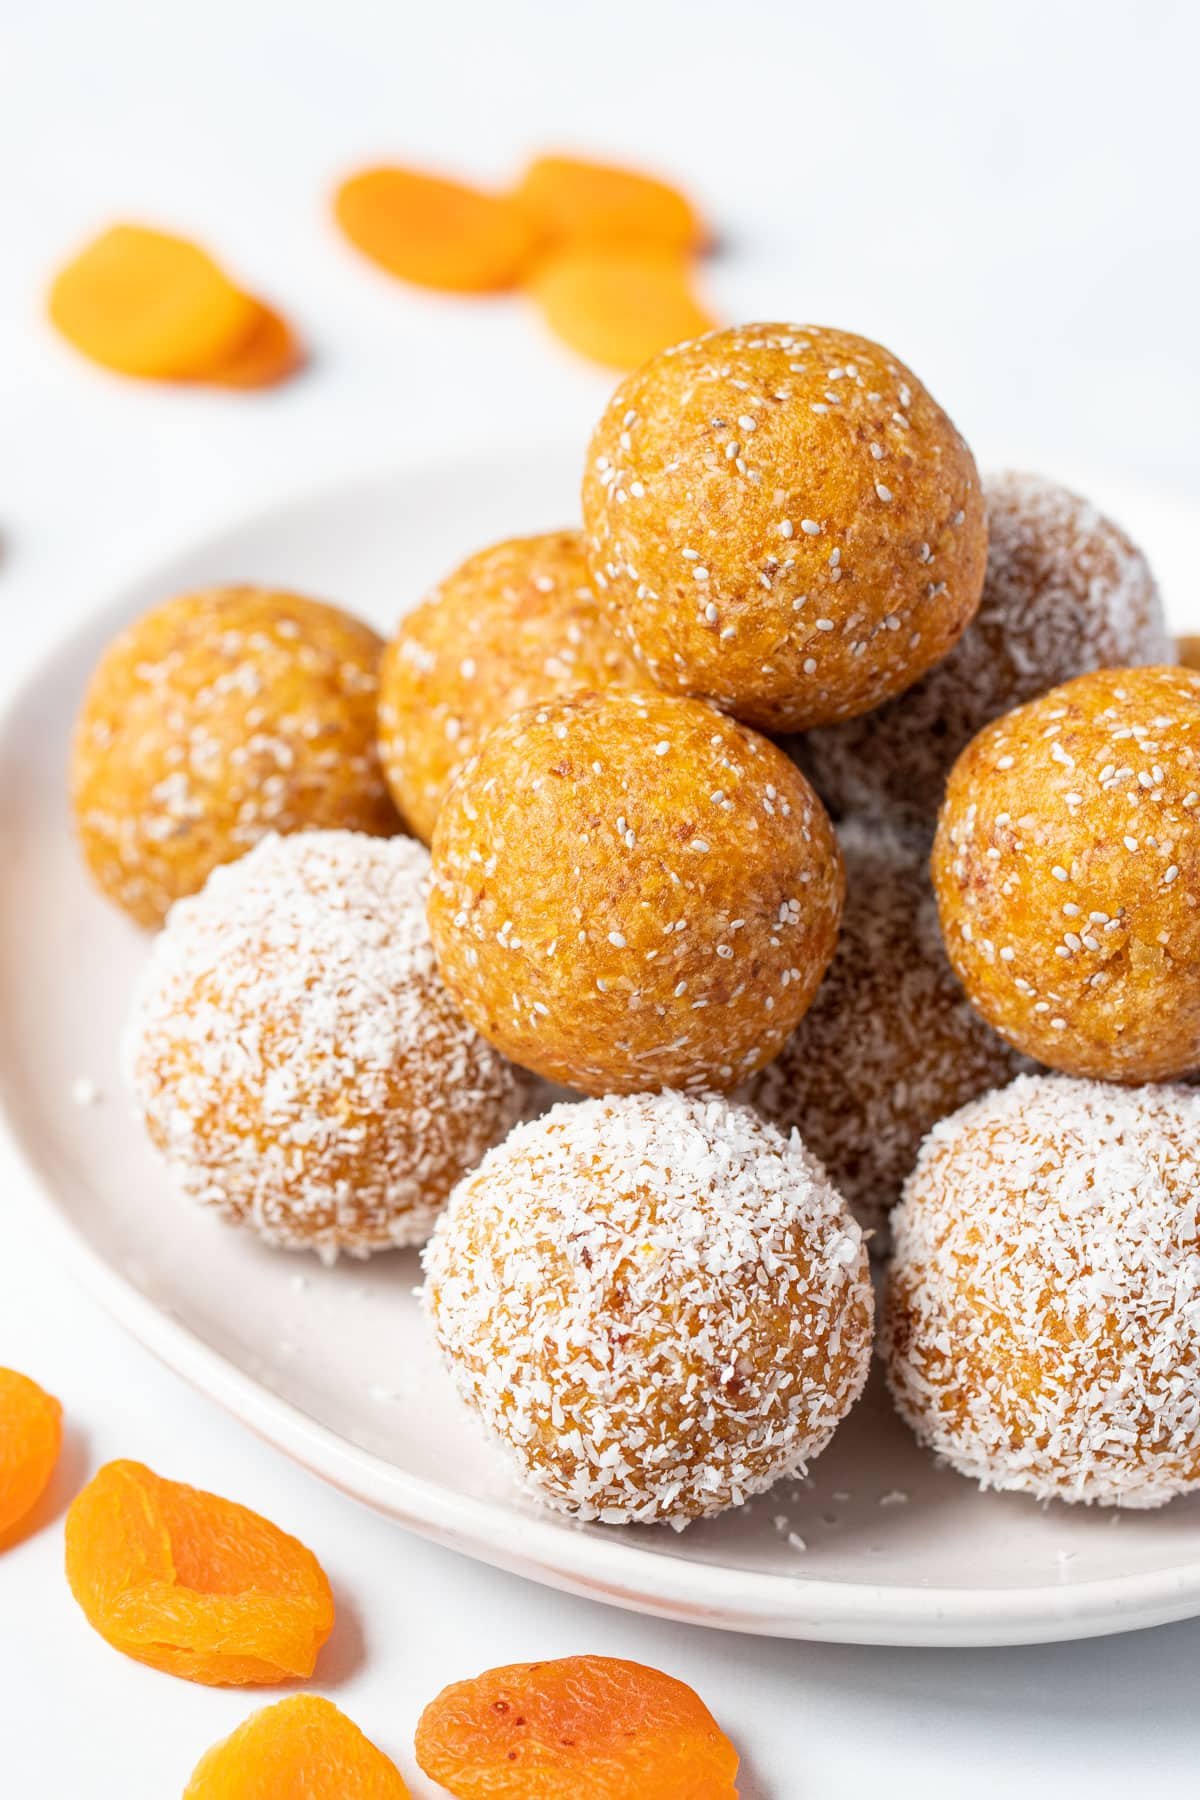 apricot balls on a plate with dried apricots on a table.